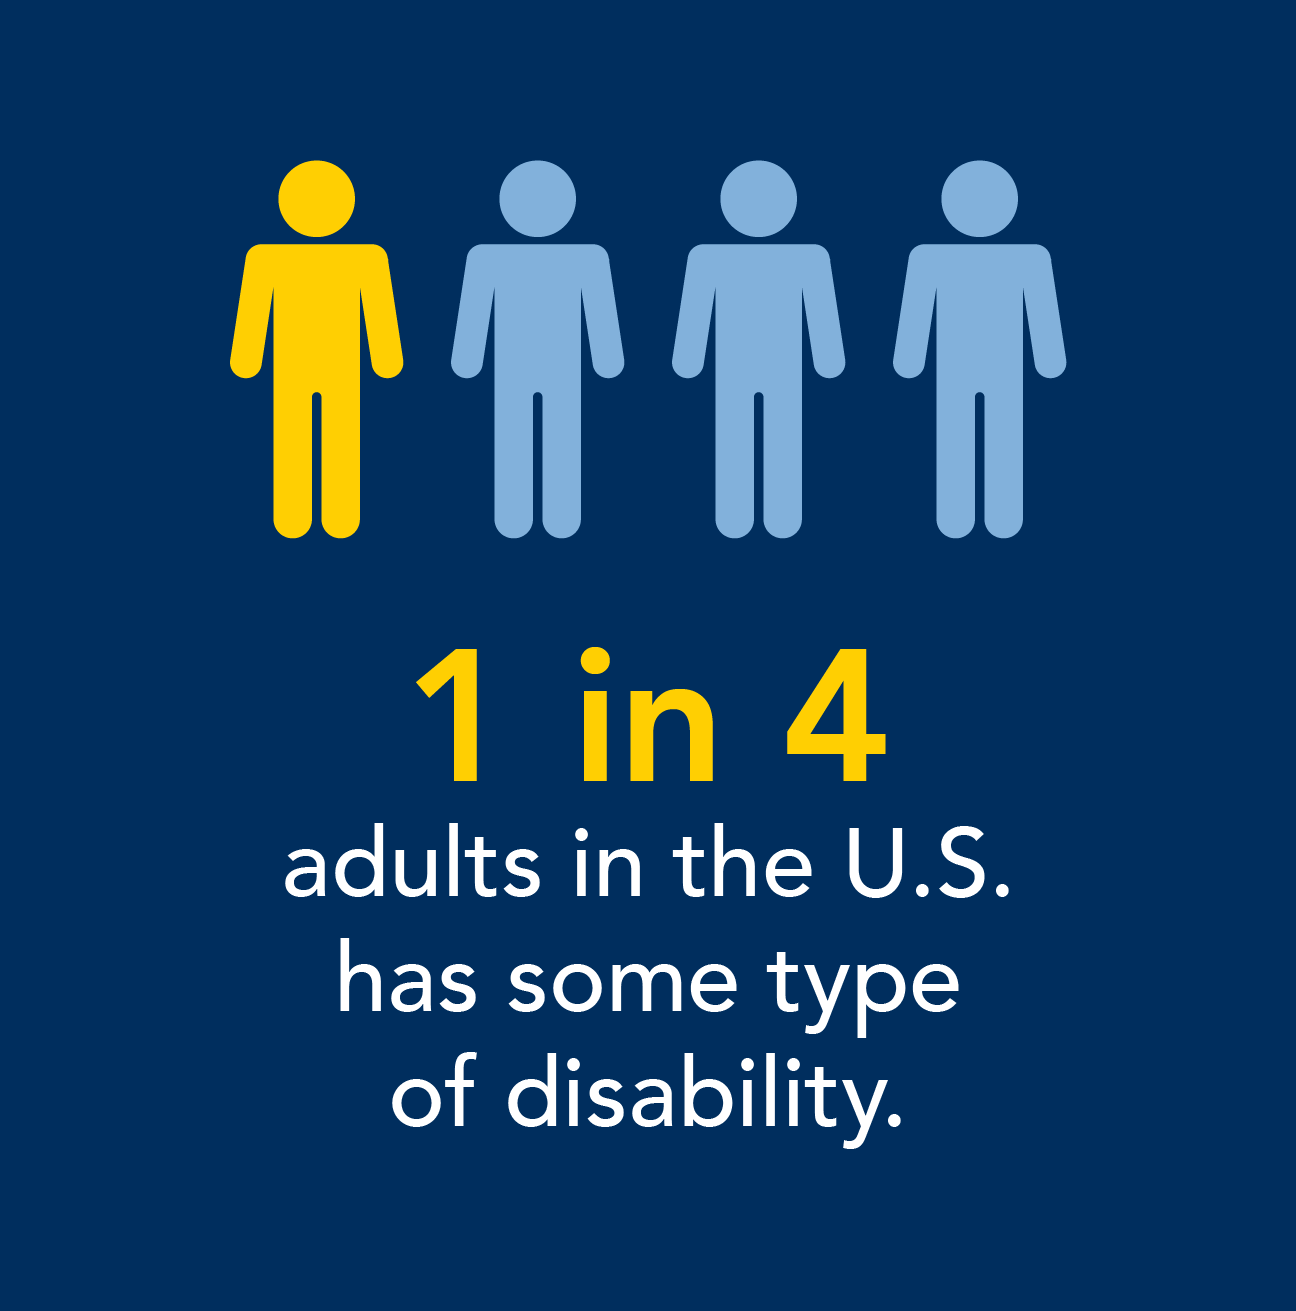 1 in 4 adults in the U.S. have some type of disability.